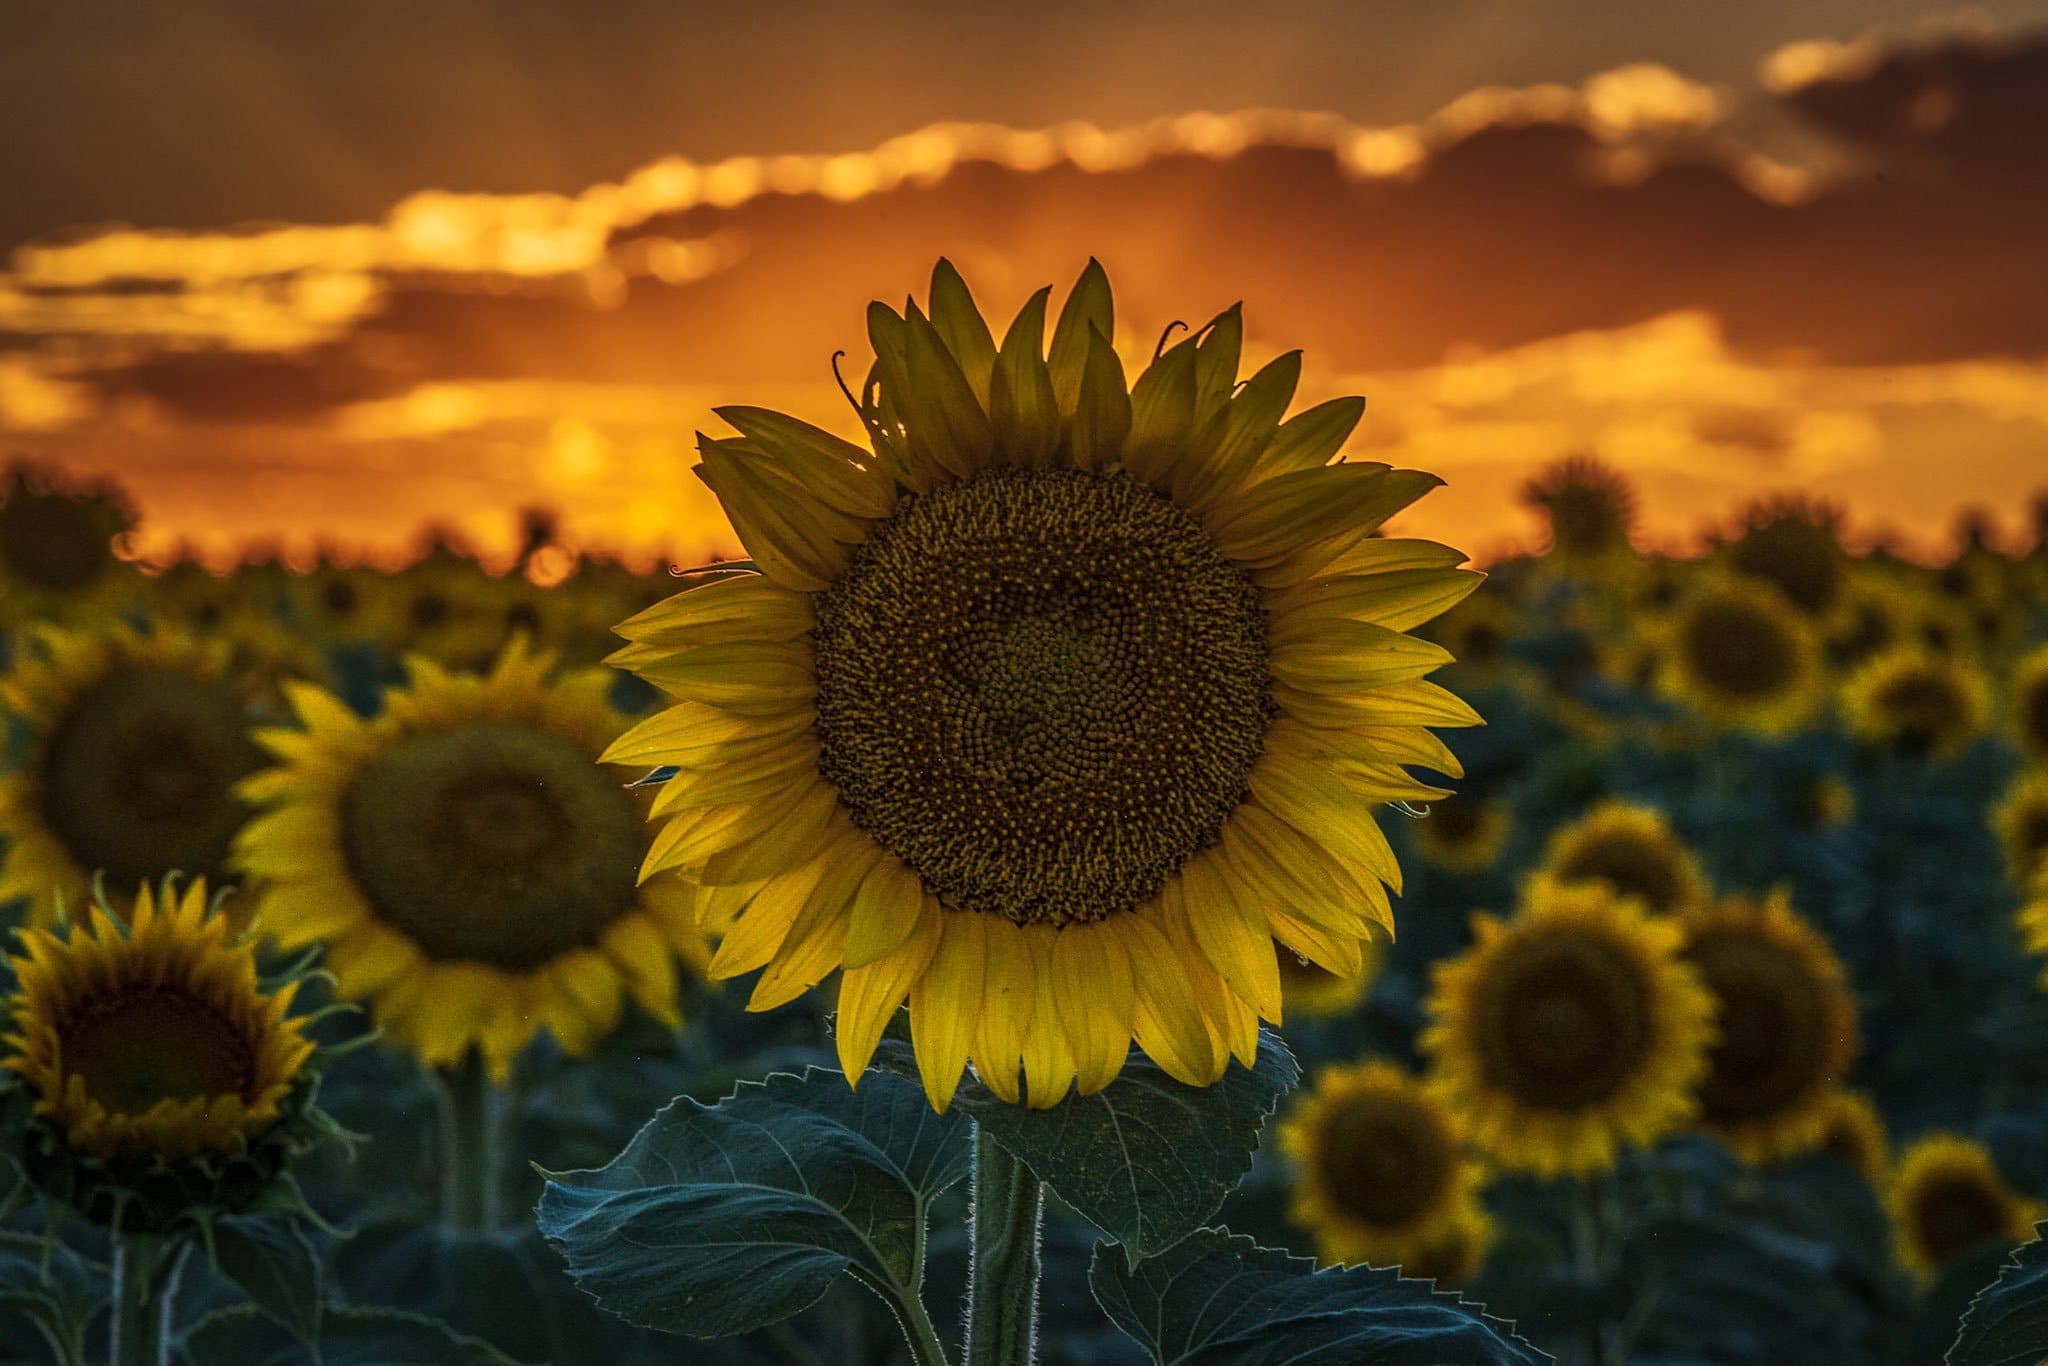 2nd Place A colorful sunset over a sunflower field near Denver International Airport by Michael Ryno Photo @mnryno34